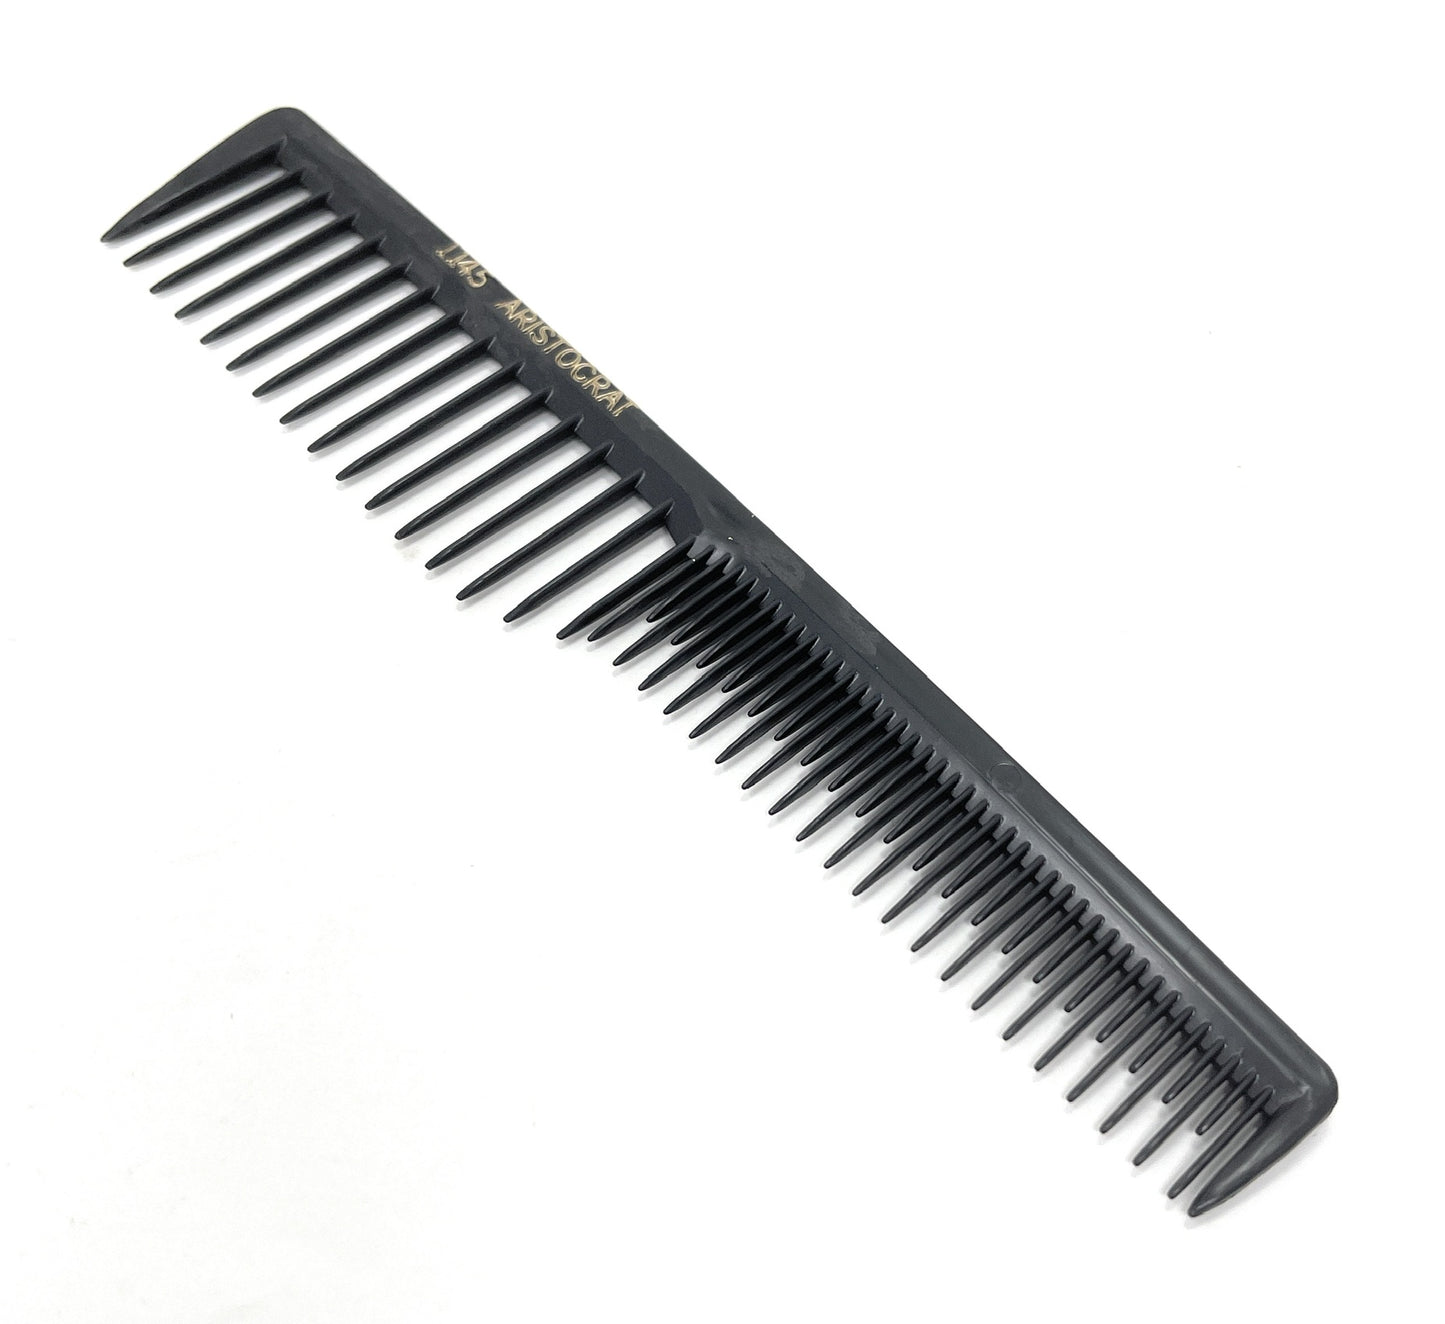 Aristocrat 1145 space tease combs Wide Tooth Teasing Lift Vented Hair Combs Space Tooth Barber Stylist Curly Hair Made In The USA  black  12 Pcs.